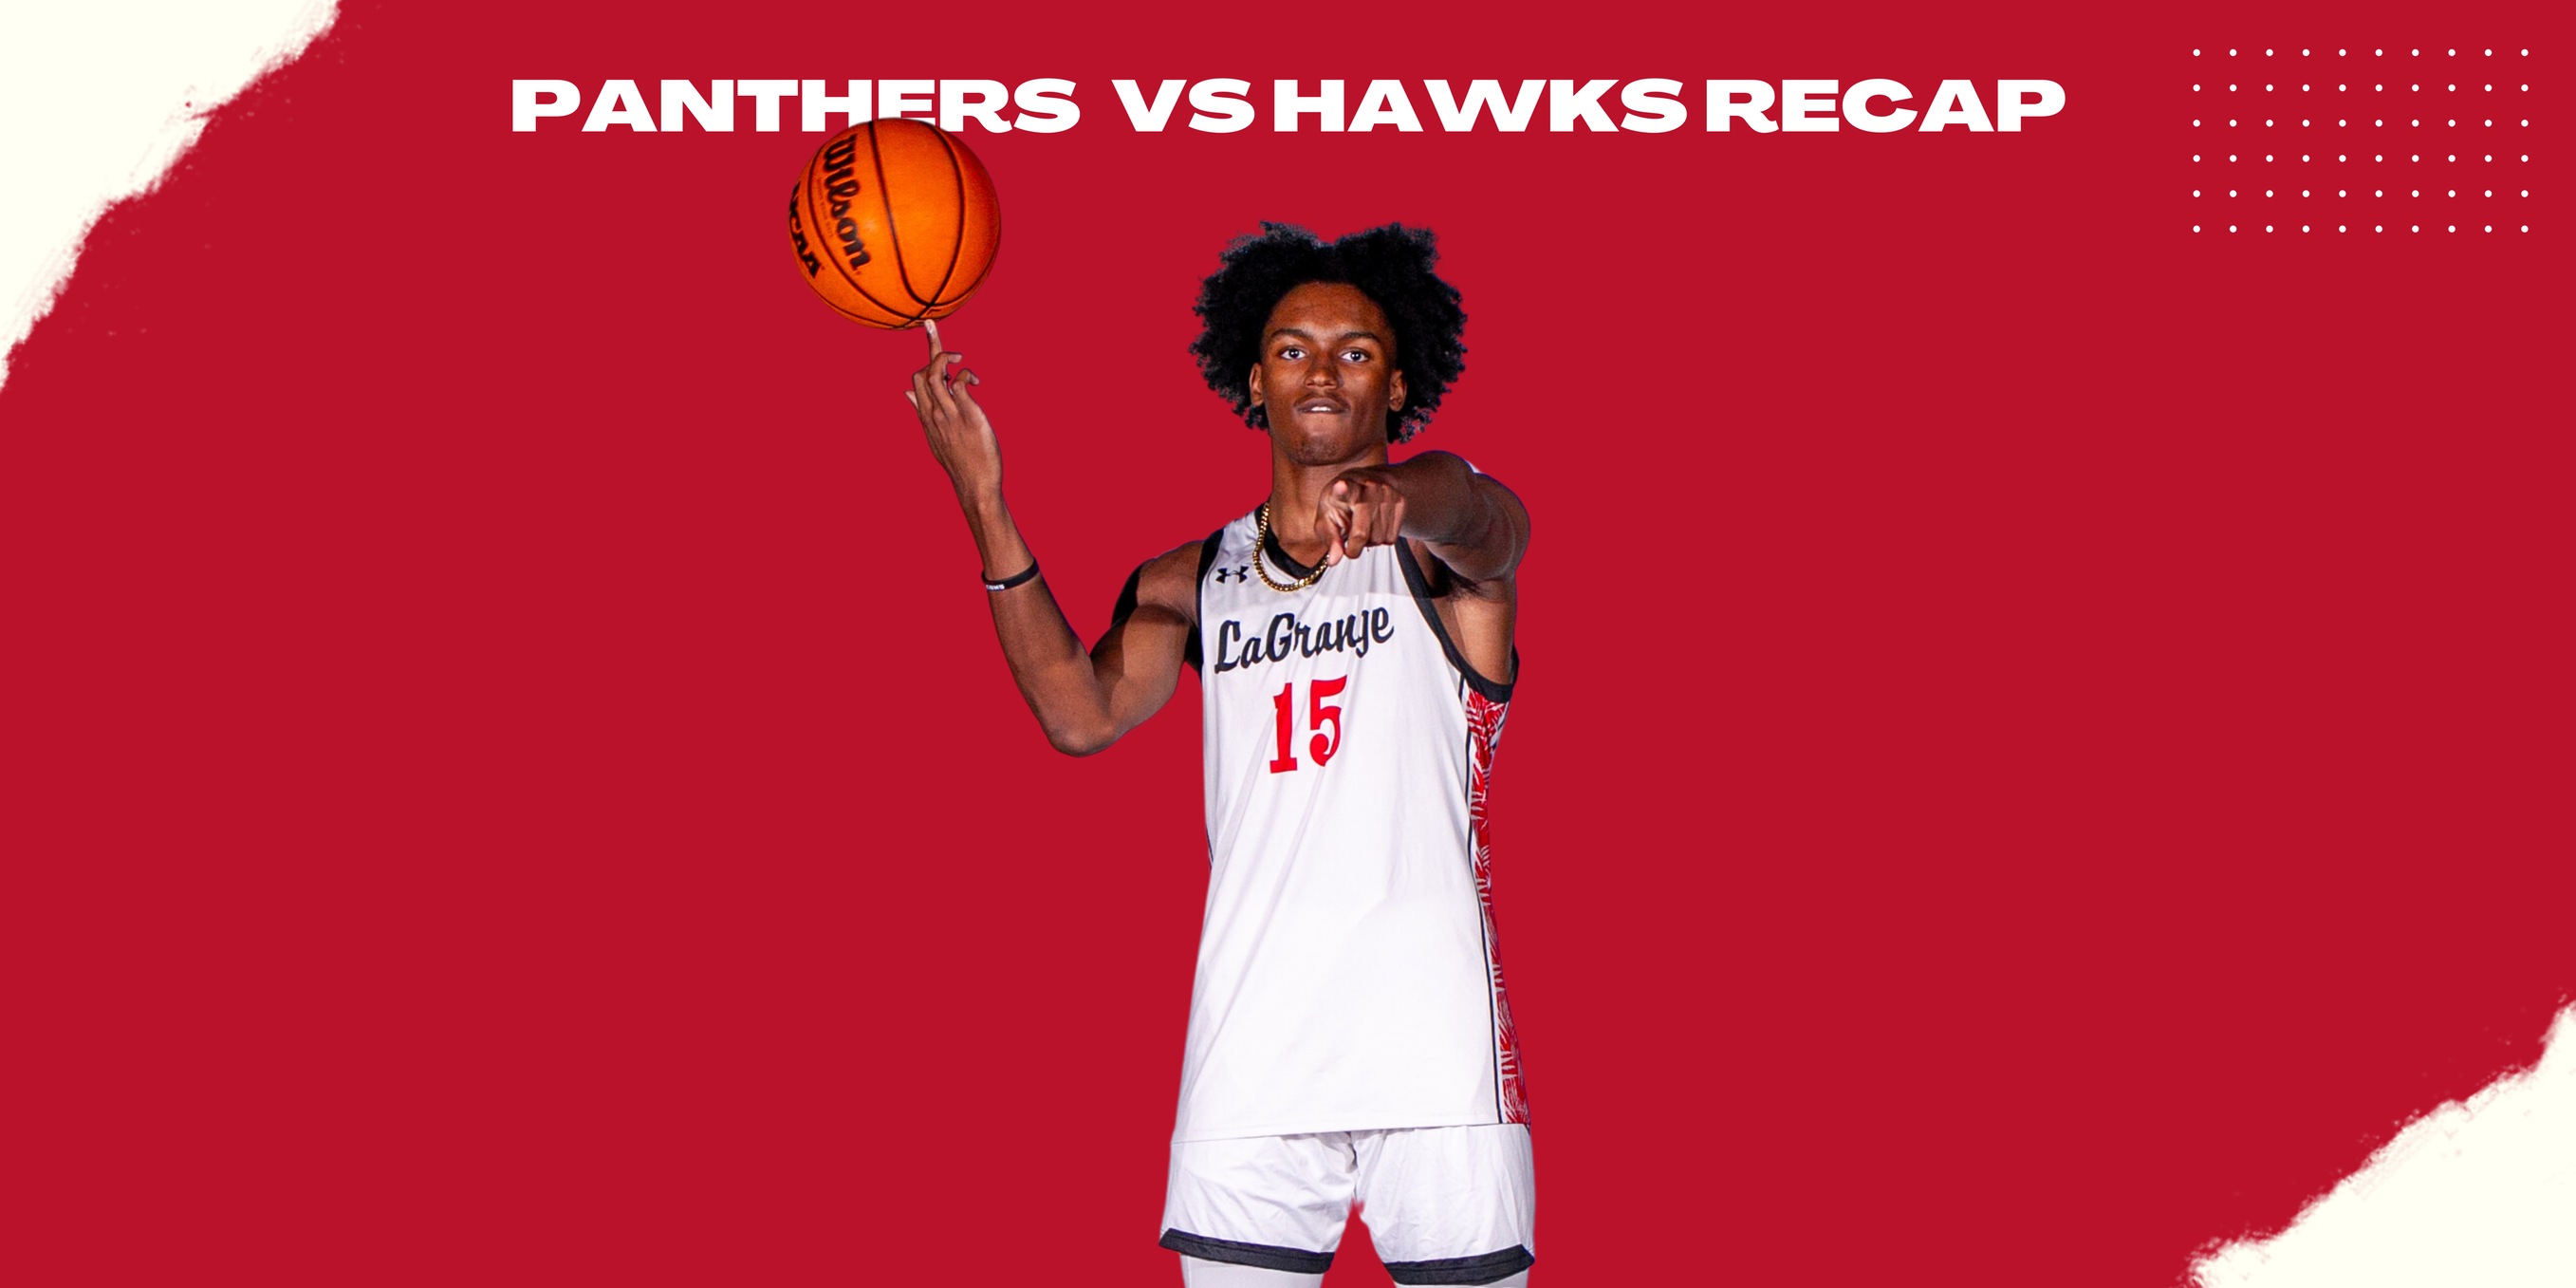 The Panthers outlast the Hawks in a 100-96 victory